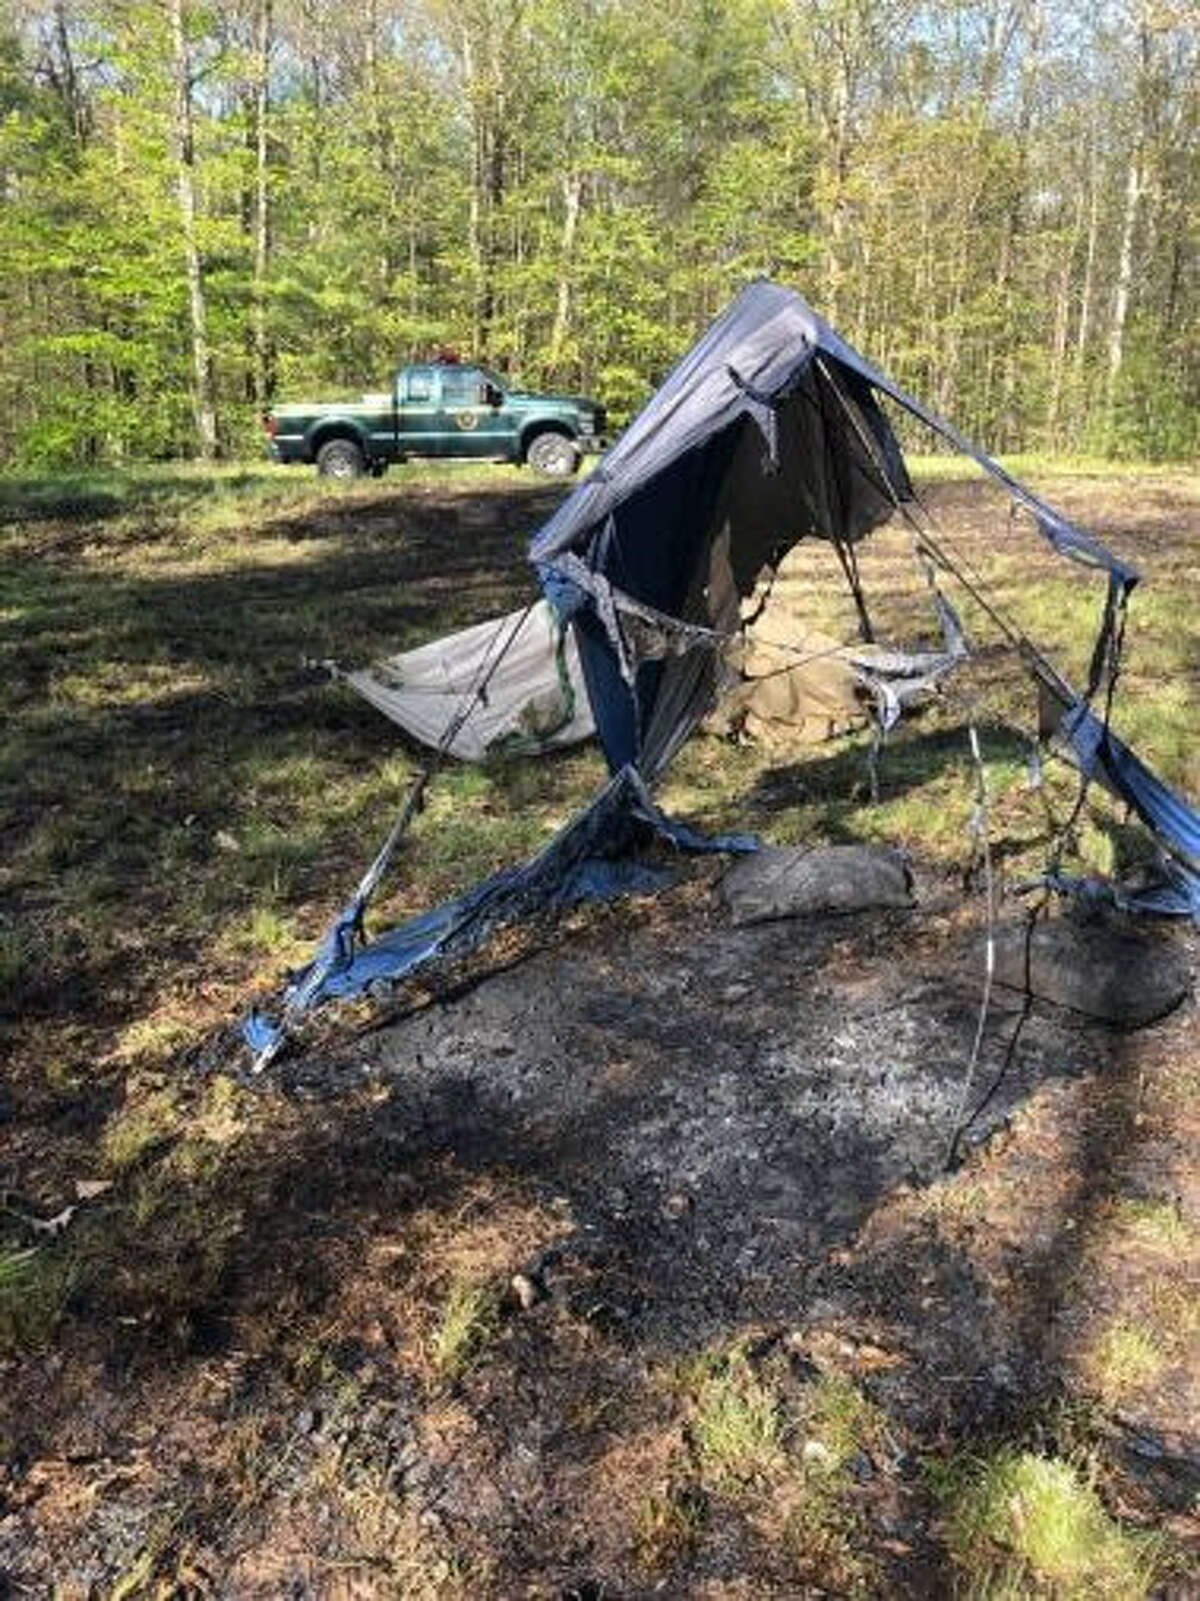 The state Department of Environmental Conservation says four campers who left a campfire unattended at a state campground in Austerlitz on Monday lost all of their belongings after the flames spread to nearby brush and ended up burning 1.8 acres of forest.